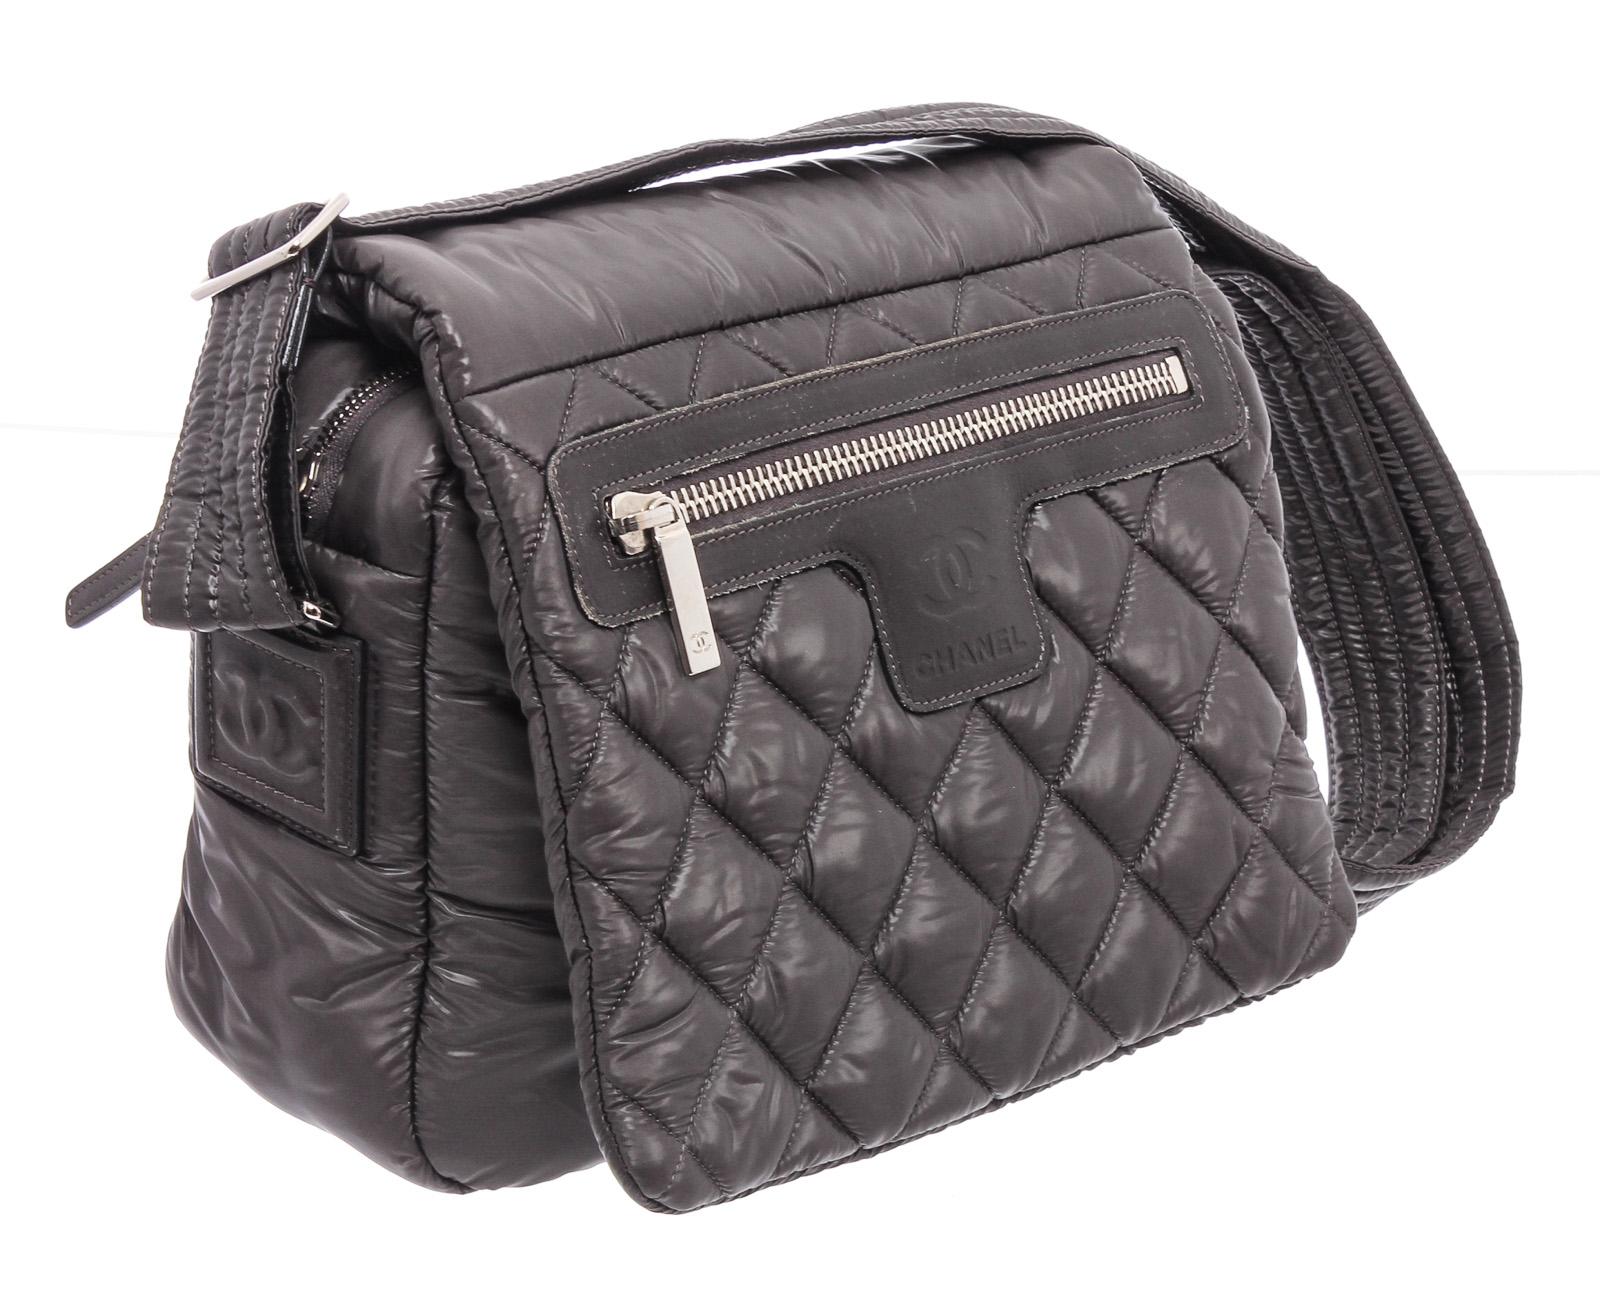 Black quilted nylon Chanel Coco Cocoon Messenger Bag with silver-tone hardware, tonal leather trim, single flat shoulder strap, single exterior zip pocket, embossed logo accent at front face, burgundy nylon lining, single interior zip pocket and zip